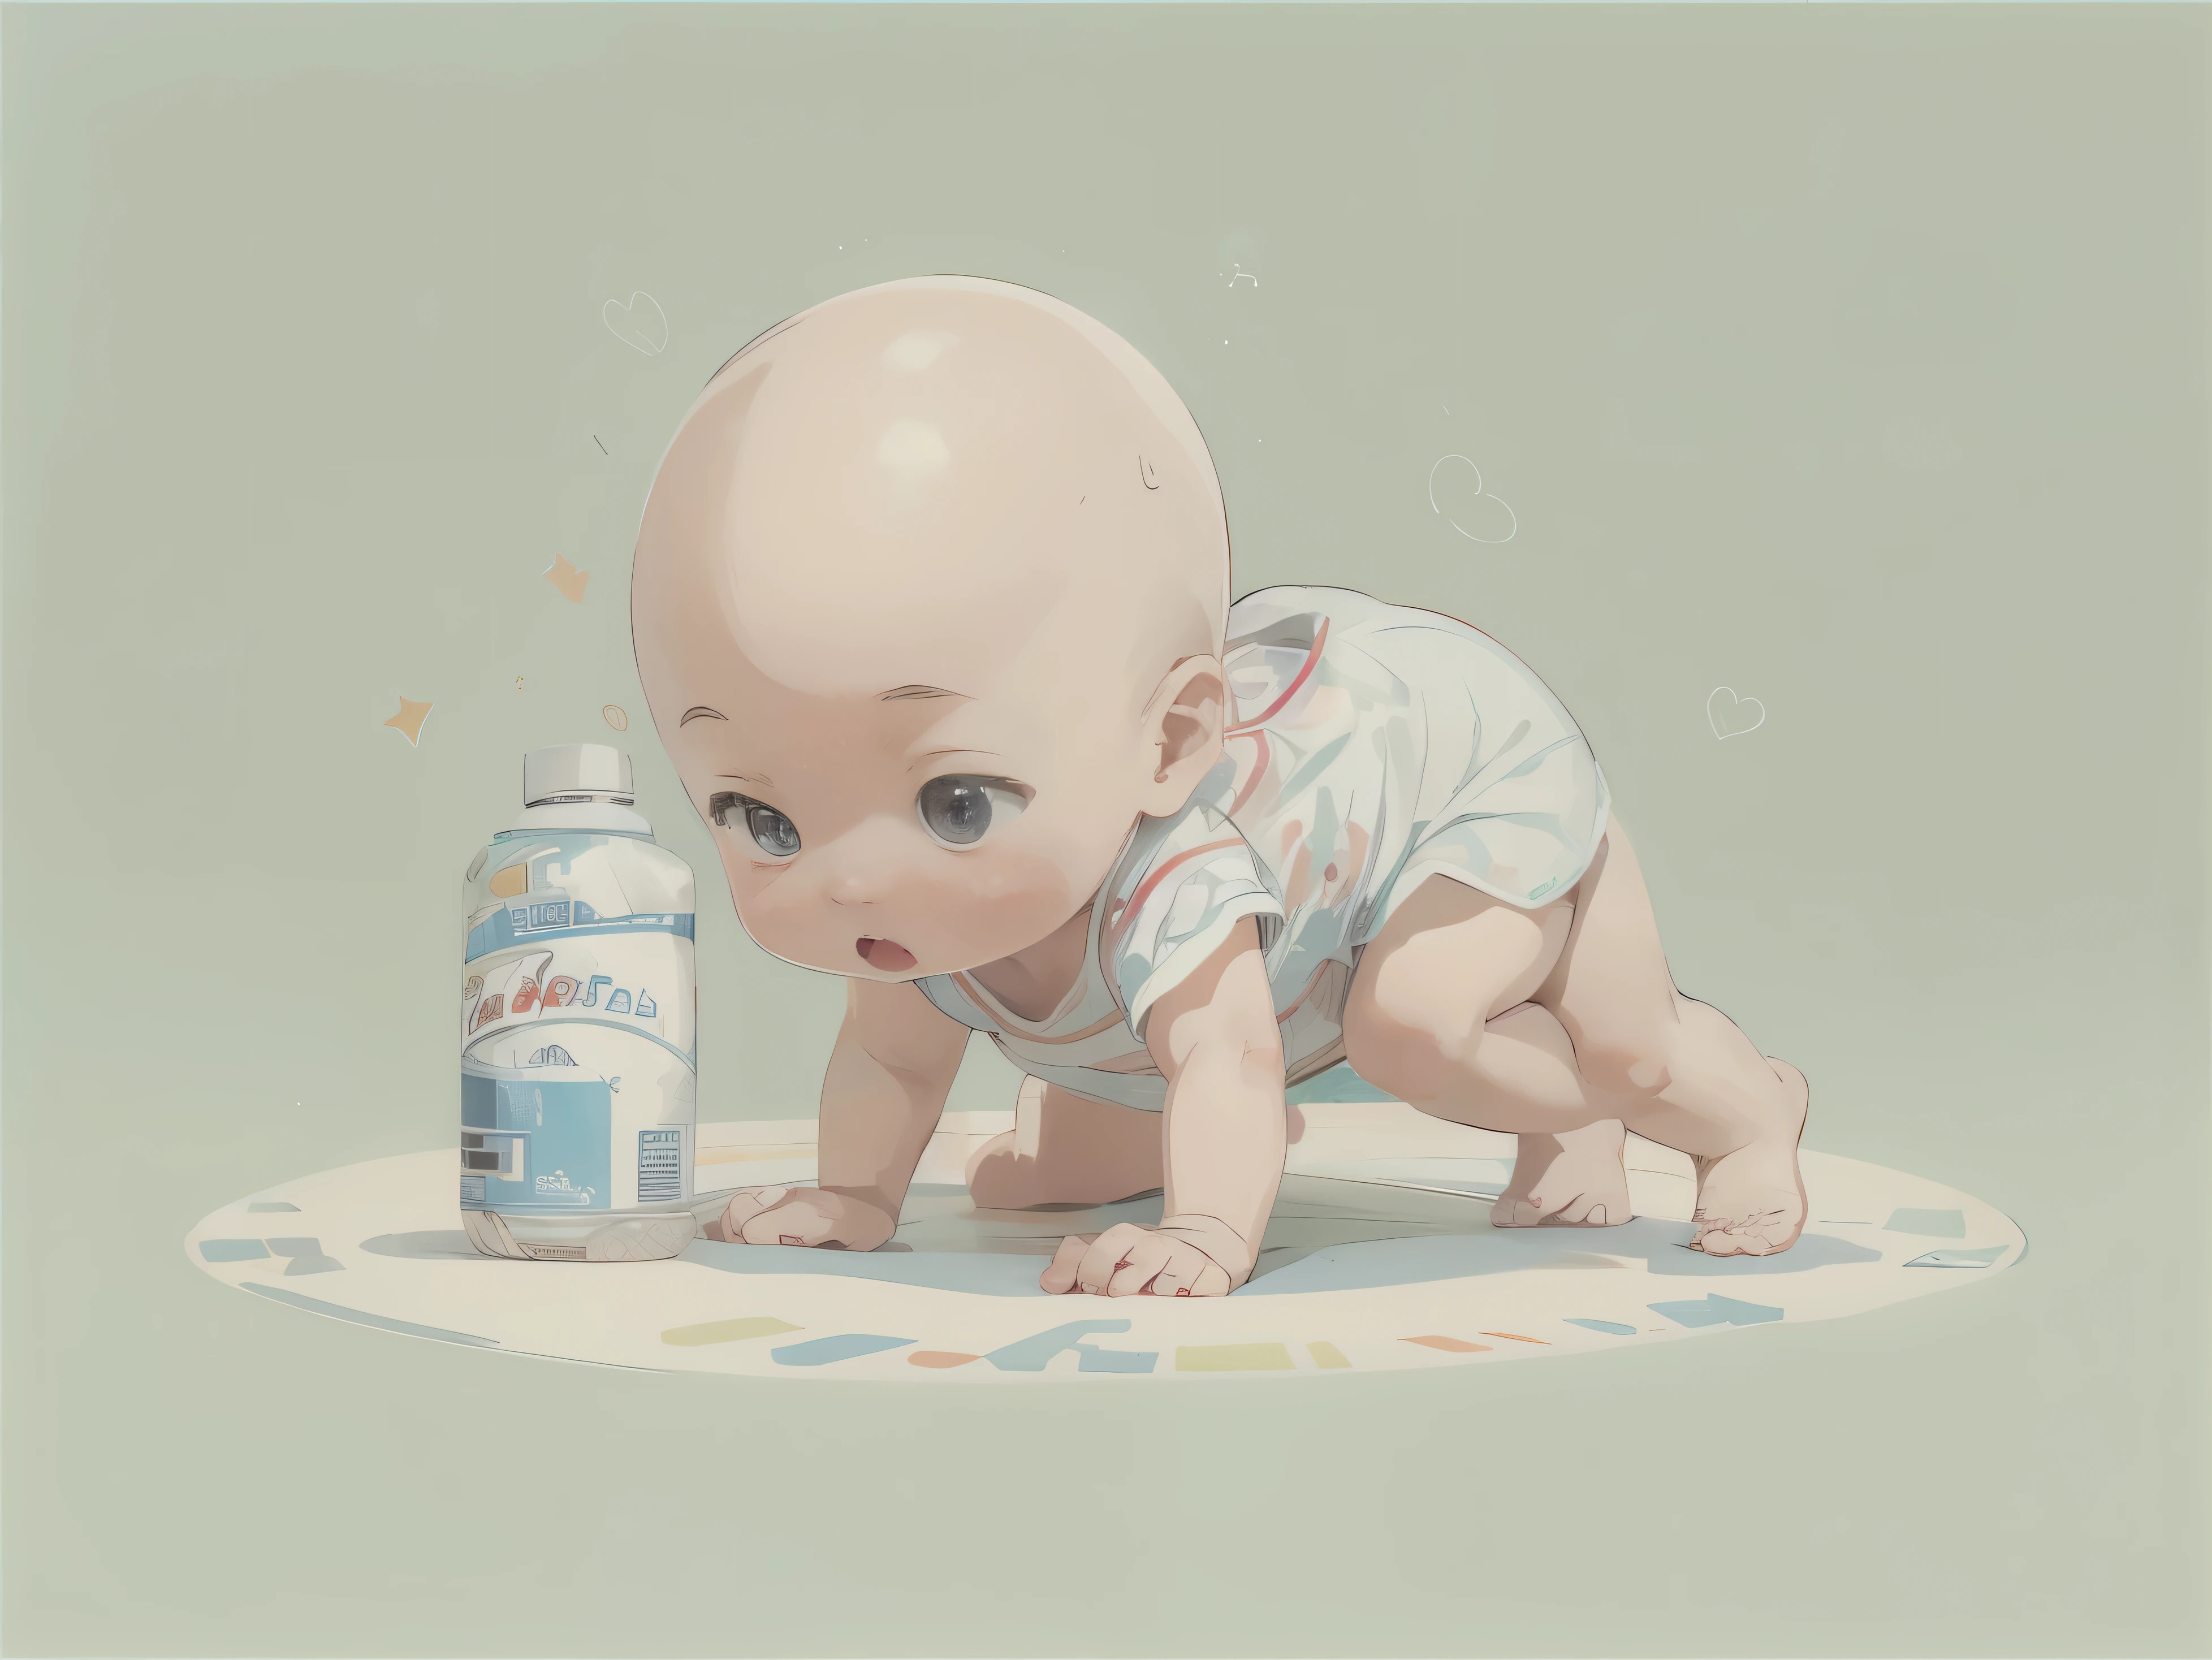 Best quality, masterpiece, baby, diaper visible, wearing diaper, cute baby, cartoon style, illustration, white background, no shadow at all, one person in the center, no shoes, barefoot baby, bald head baby, crawling